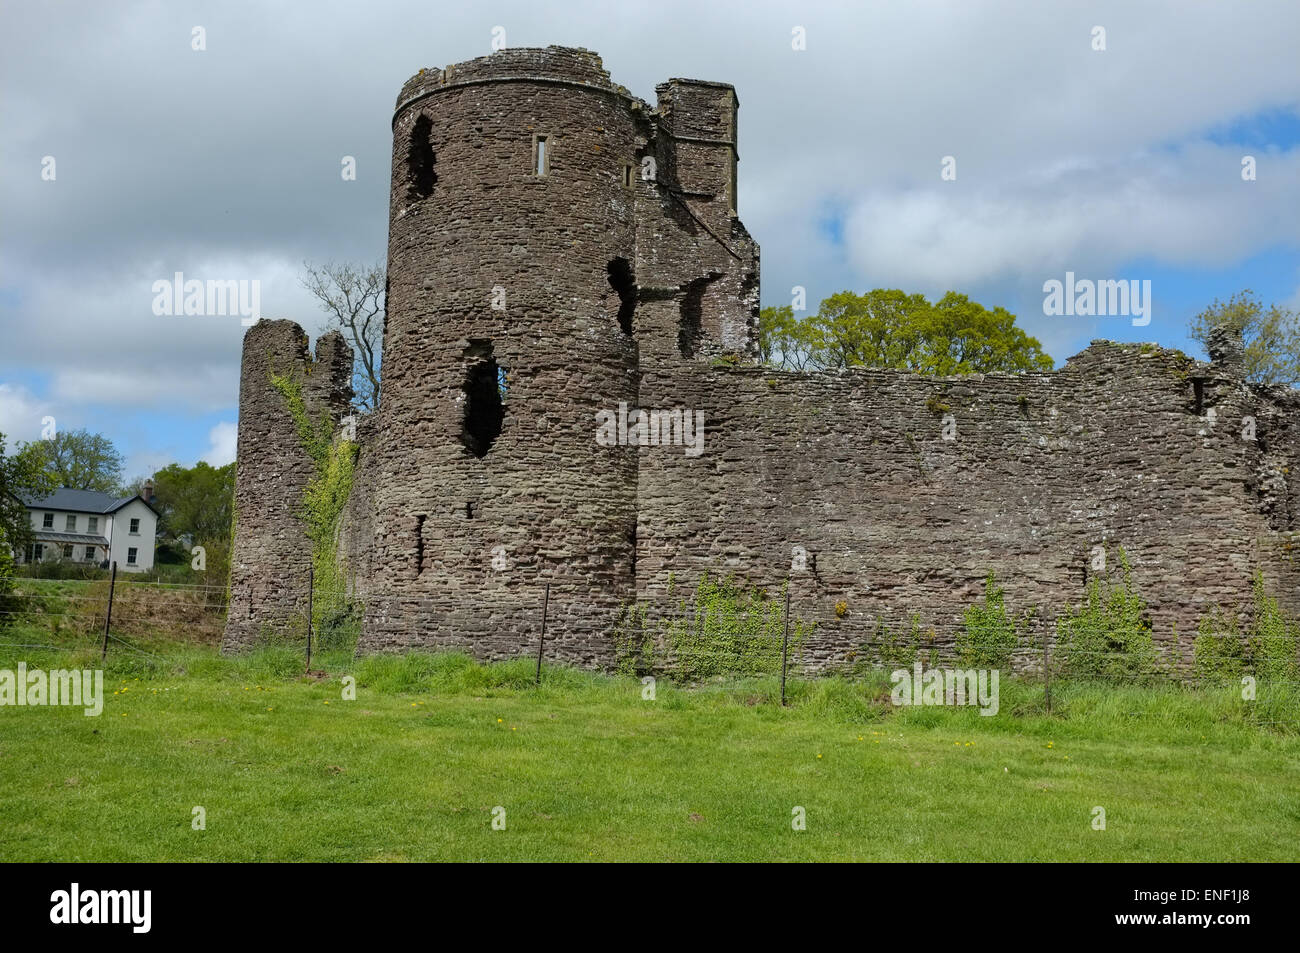 Exterior view of Grosmont Norman Castle, Grosmont, Abergavenny, Gwent Wales UK Stock Photo